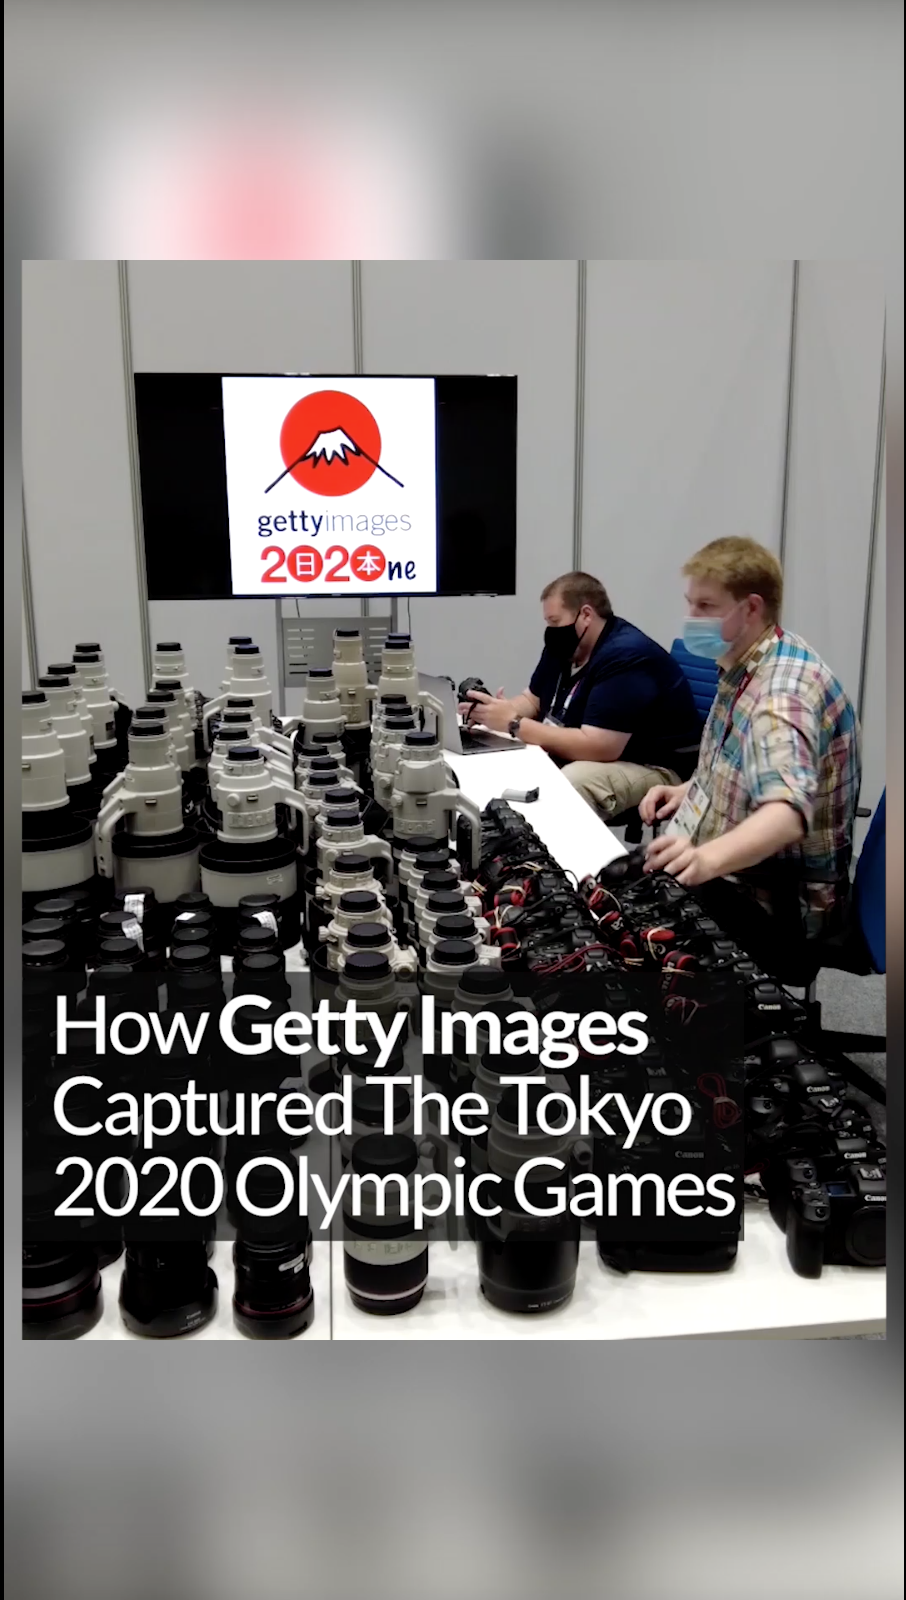 social media production - How Getty Captured The 2020 Olympics